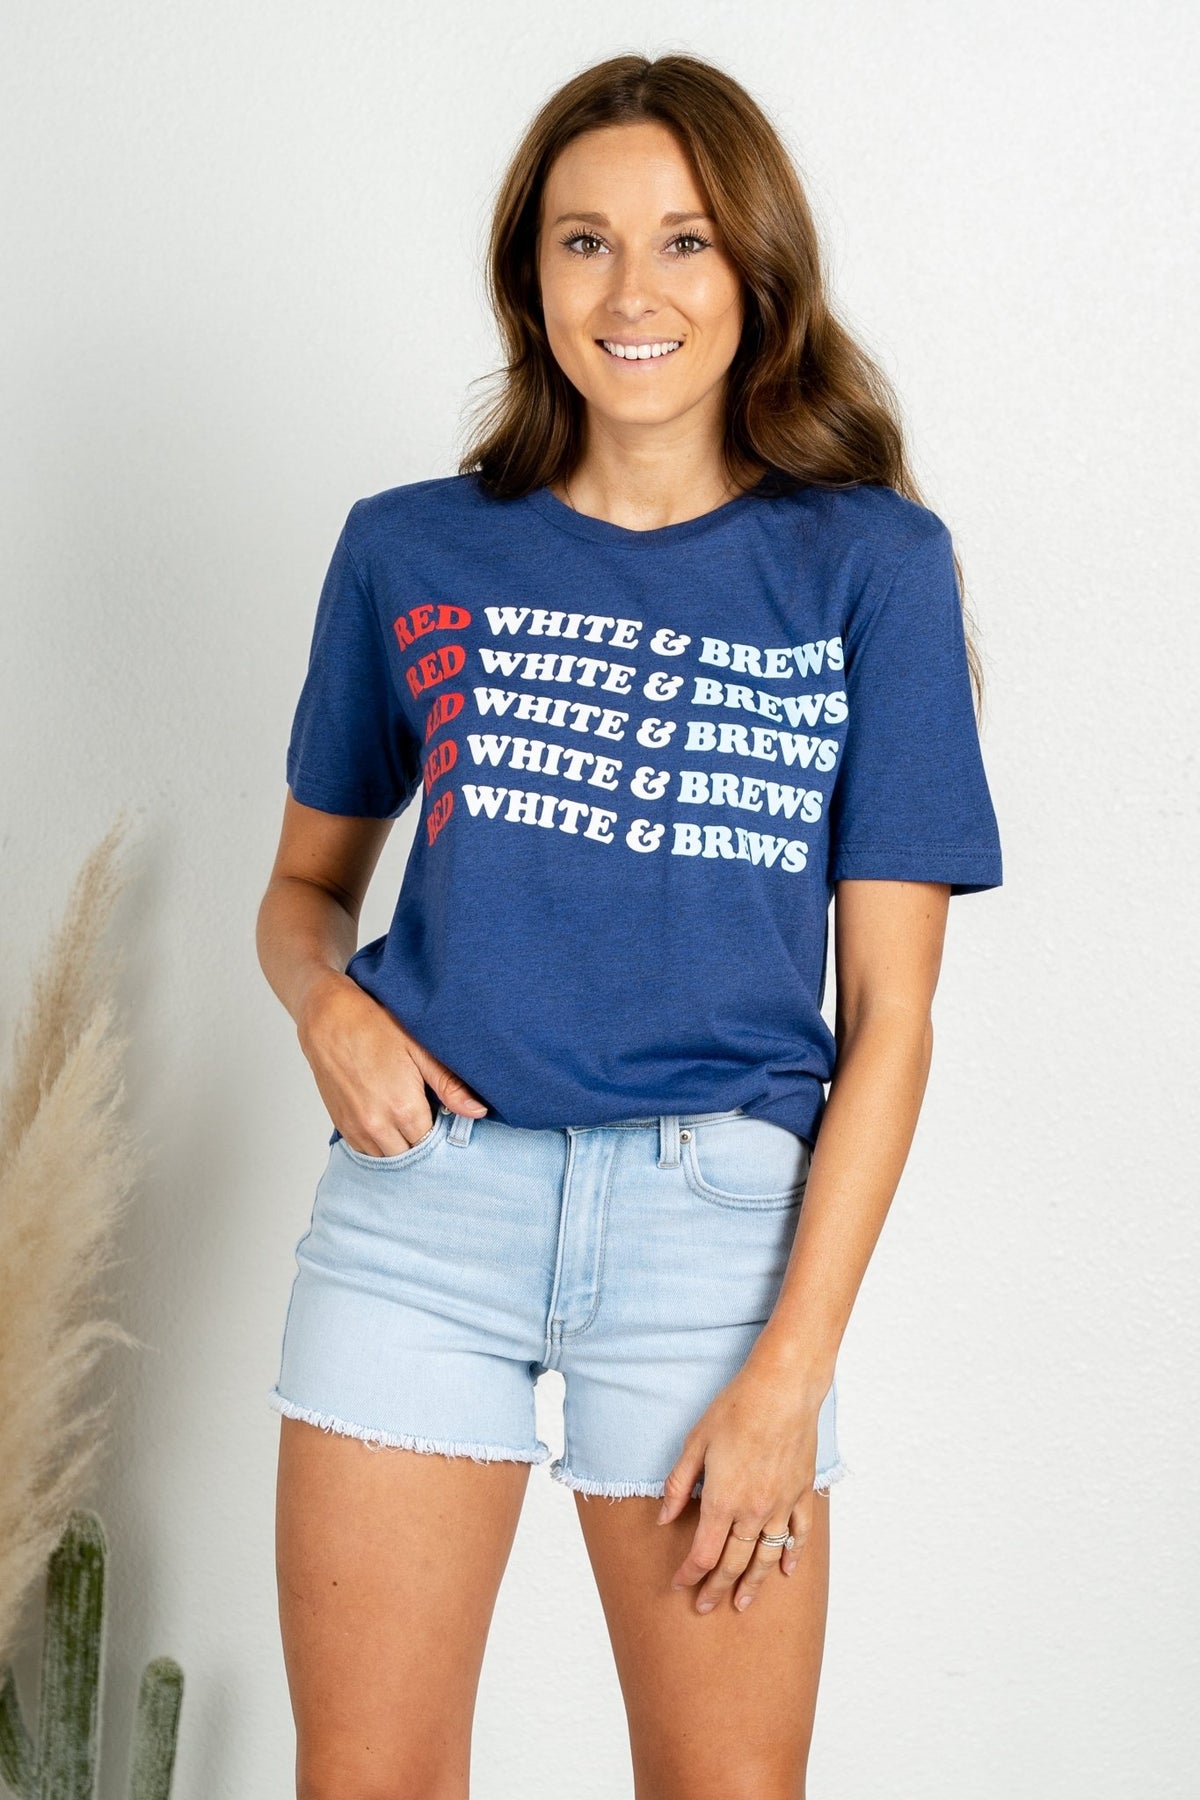 Red white and brew crew repeater crew navy - Stylish t-shirts - Trendy Graphic T-Shirts and Tank Tops at Lush Fashion Lounge Boutique in Oklahoma City